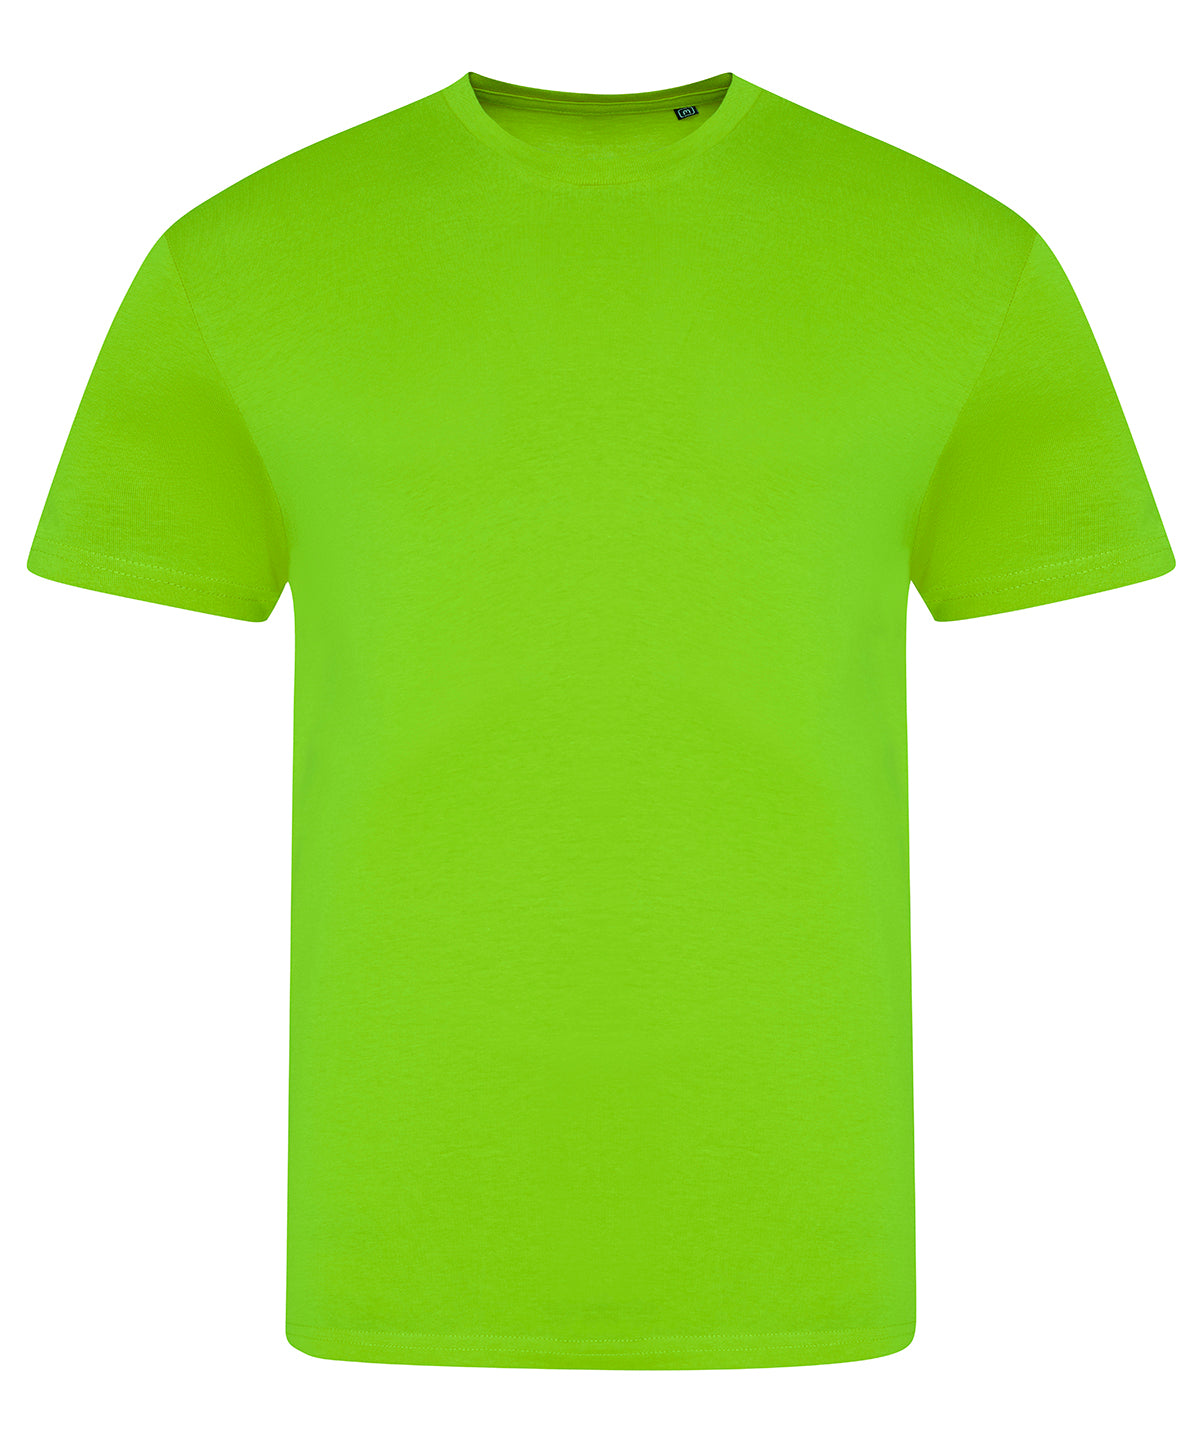 Personalised T-Shirts - Neon Green AWDis Just T's Electric triblend T